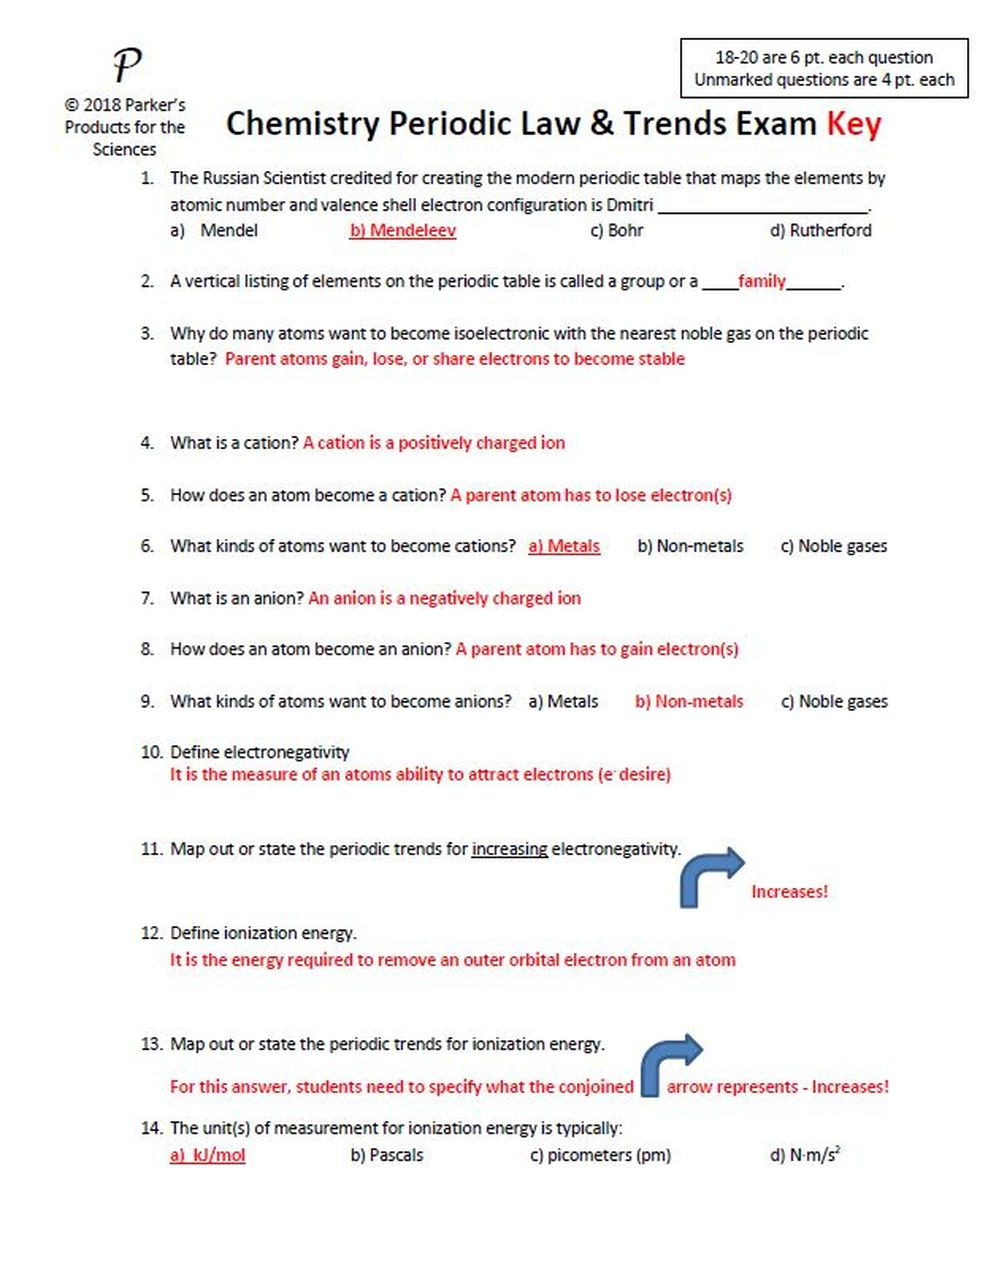 Periodic Trends Worksheet Answer Key Periodic Laws and Trends Exam for Chemistry with A Key